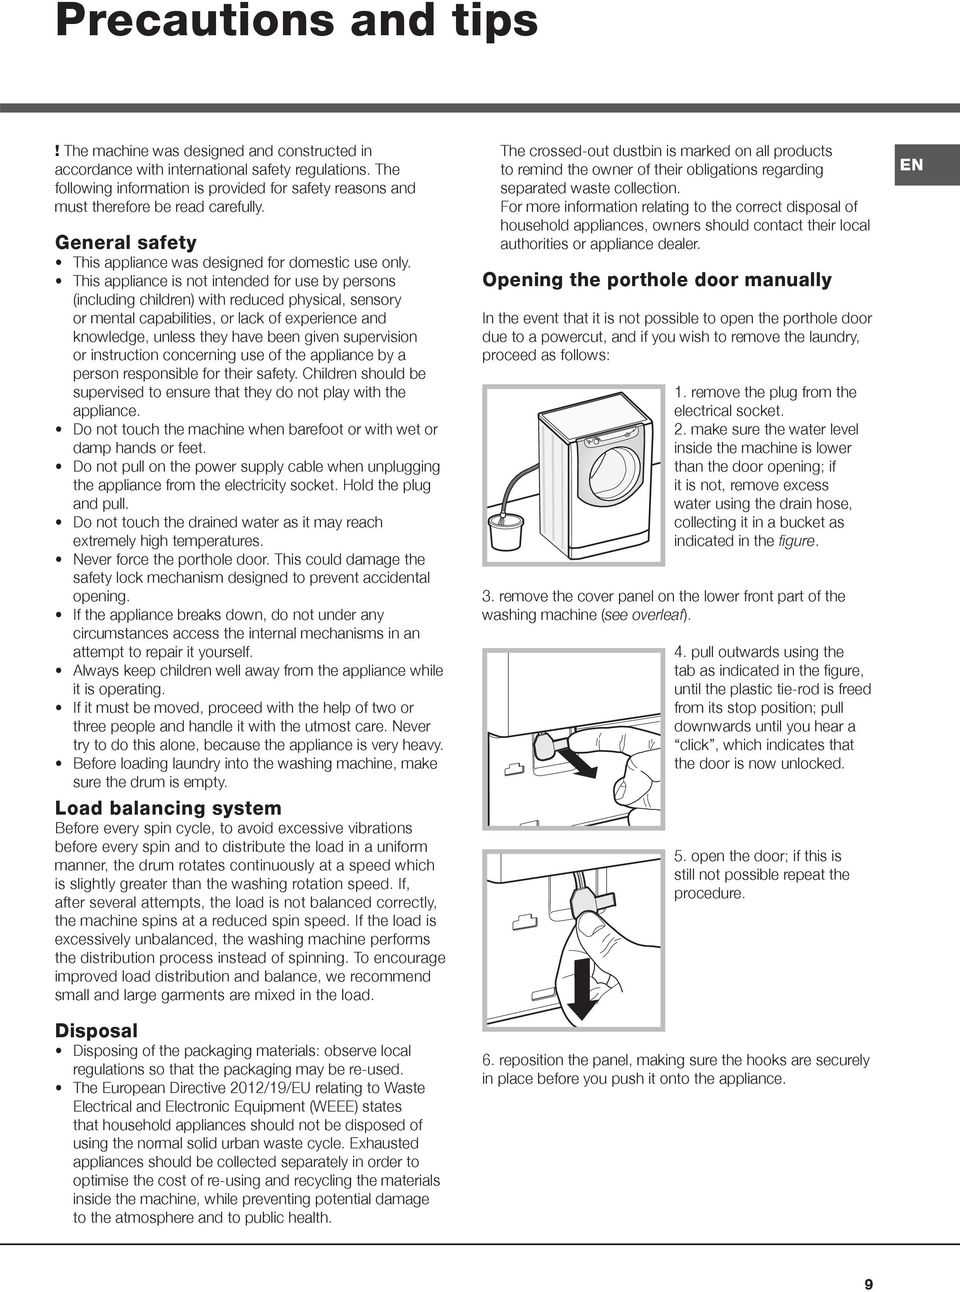 This appliance is not intended for use by persons (including children) with reduced physical, sensory or mental capabilities, or lack of experience and knowledge, unless they have been given